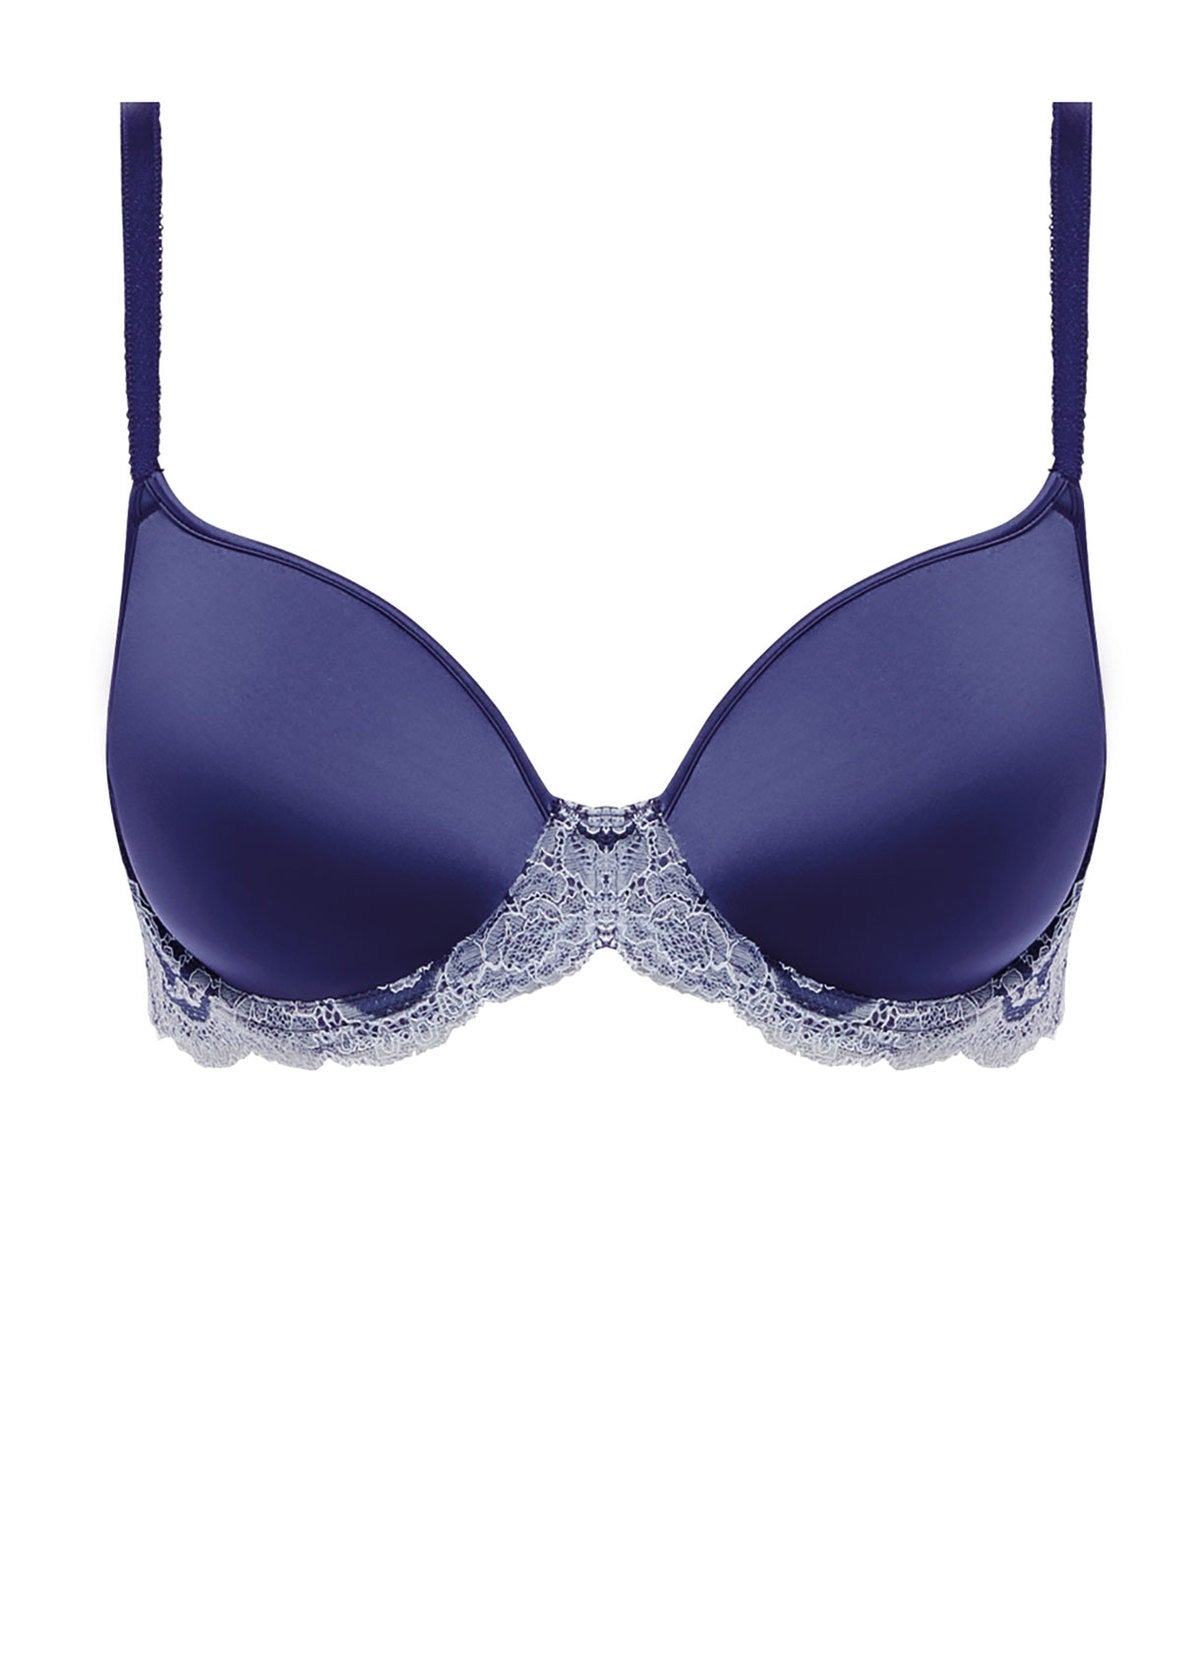 Wacoal womens Fire and Lace Underwire Bra, Blue/Cameo, 34C US at